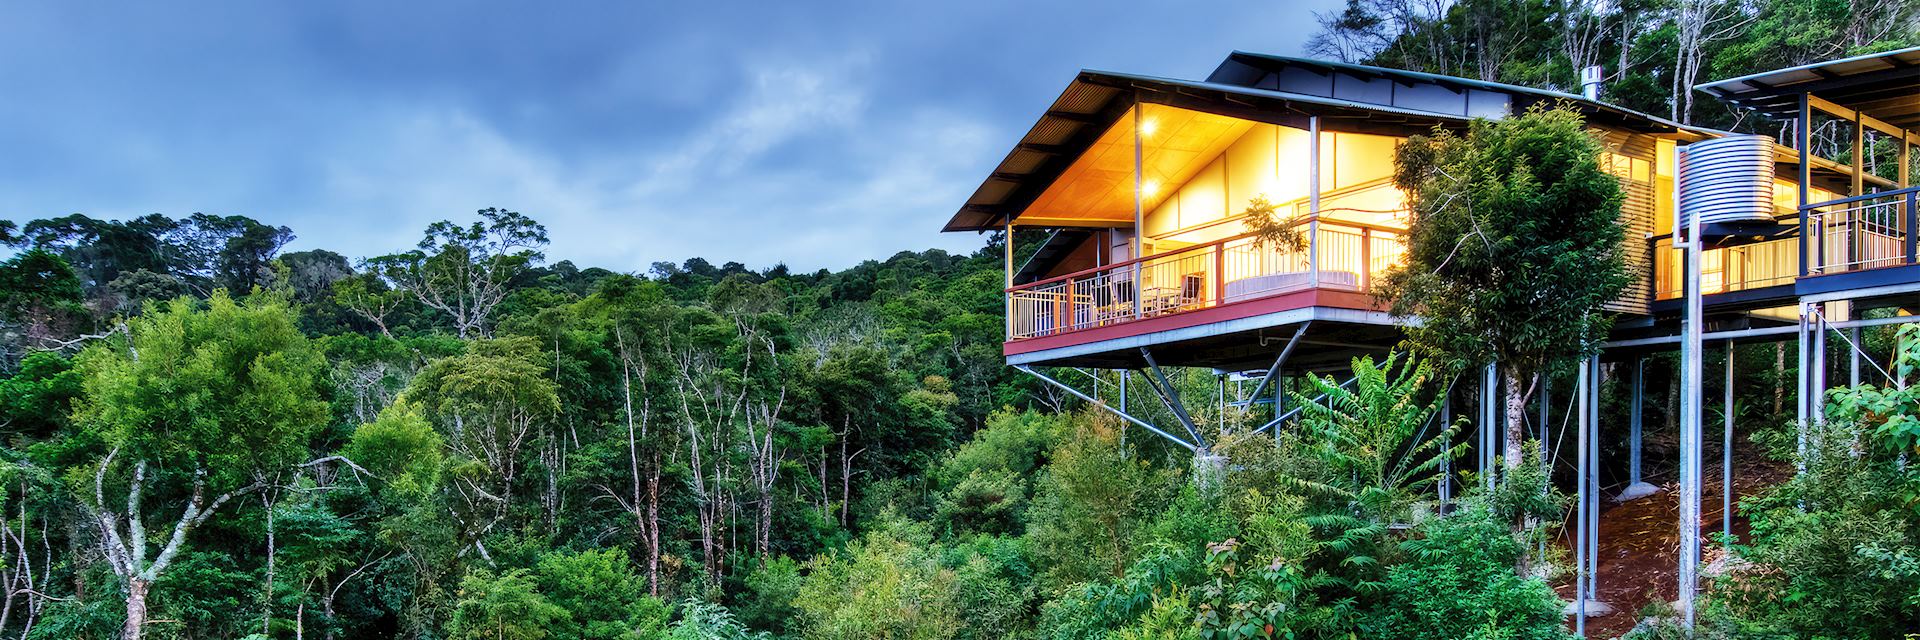 O'Reilly's Rainforest Guesthouse